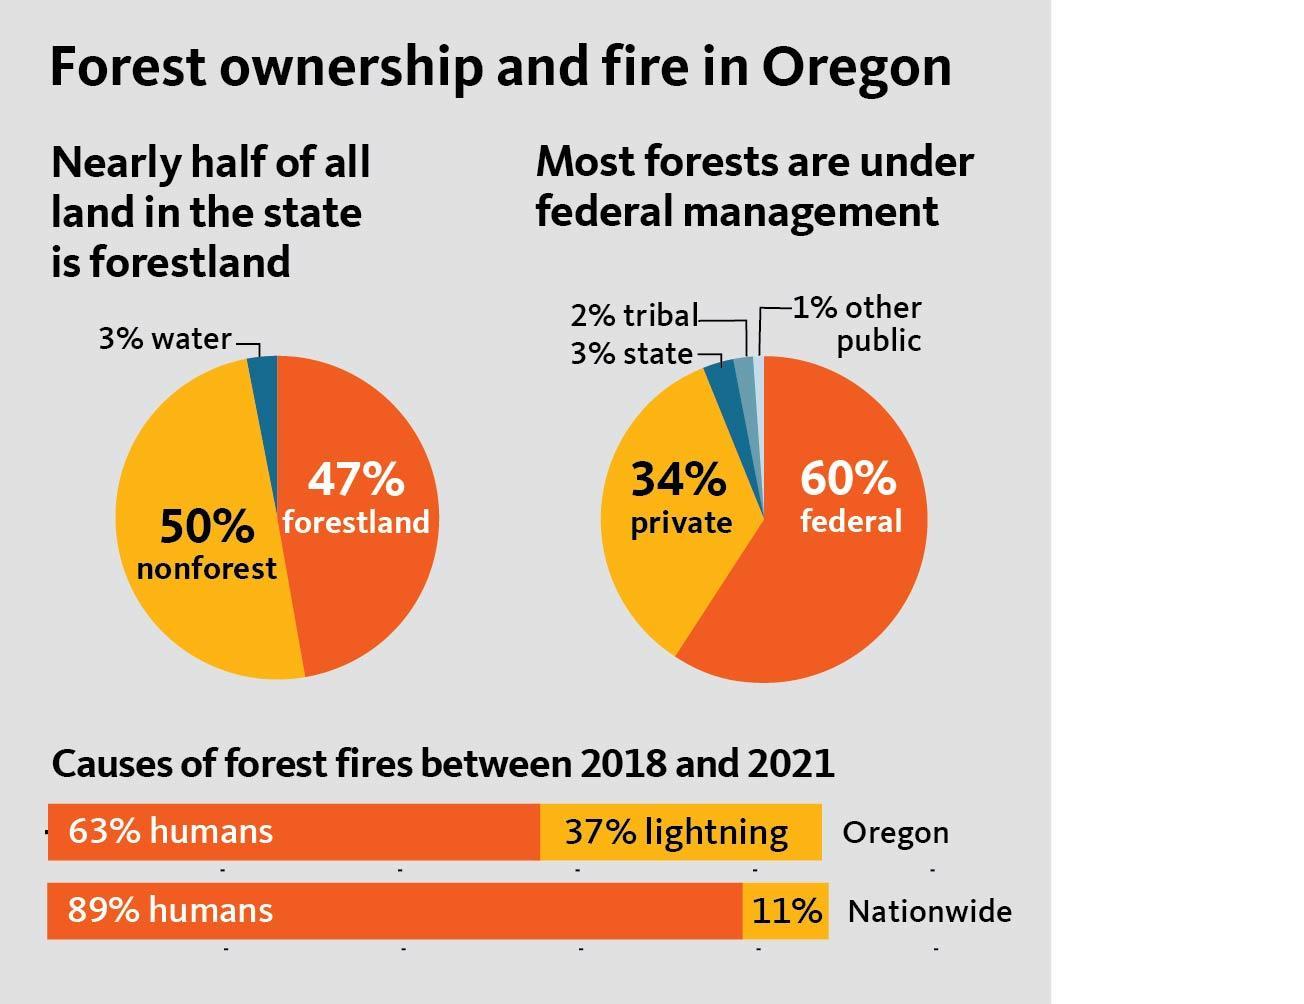 Forest ownership and fire in Oregon chart. Nearly half the land in OR is forested. Most forests are under federal management. Chart shows 50% non-forested, 47% forested and 3% water. 60% is federal land, 34 is private land, 3% is state and 2% is tribal. Lighting versus human fires between 2018-2021: 63% human created and 37% fire created by lighting in Oregon. 89% of fires created by humans and 11% of fires created by lightning nationwide.